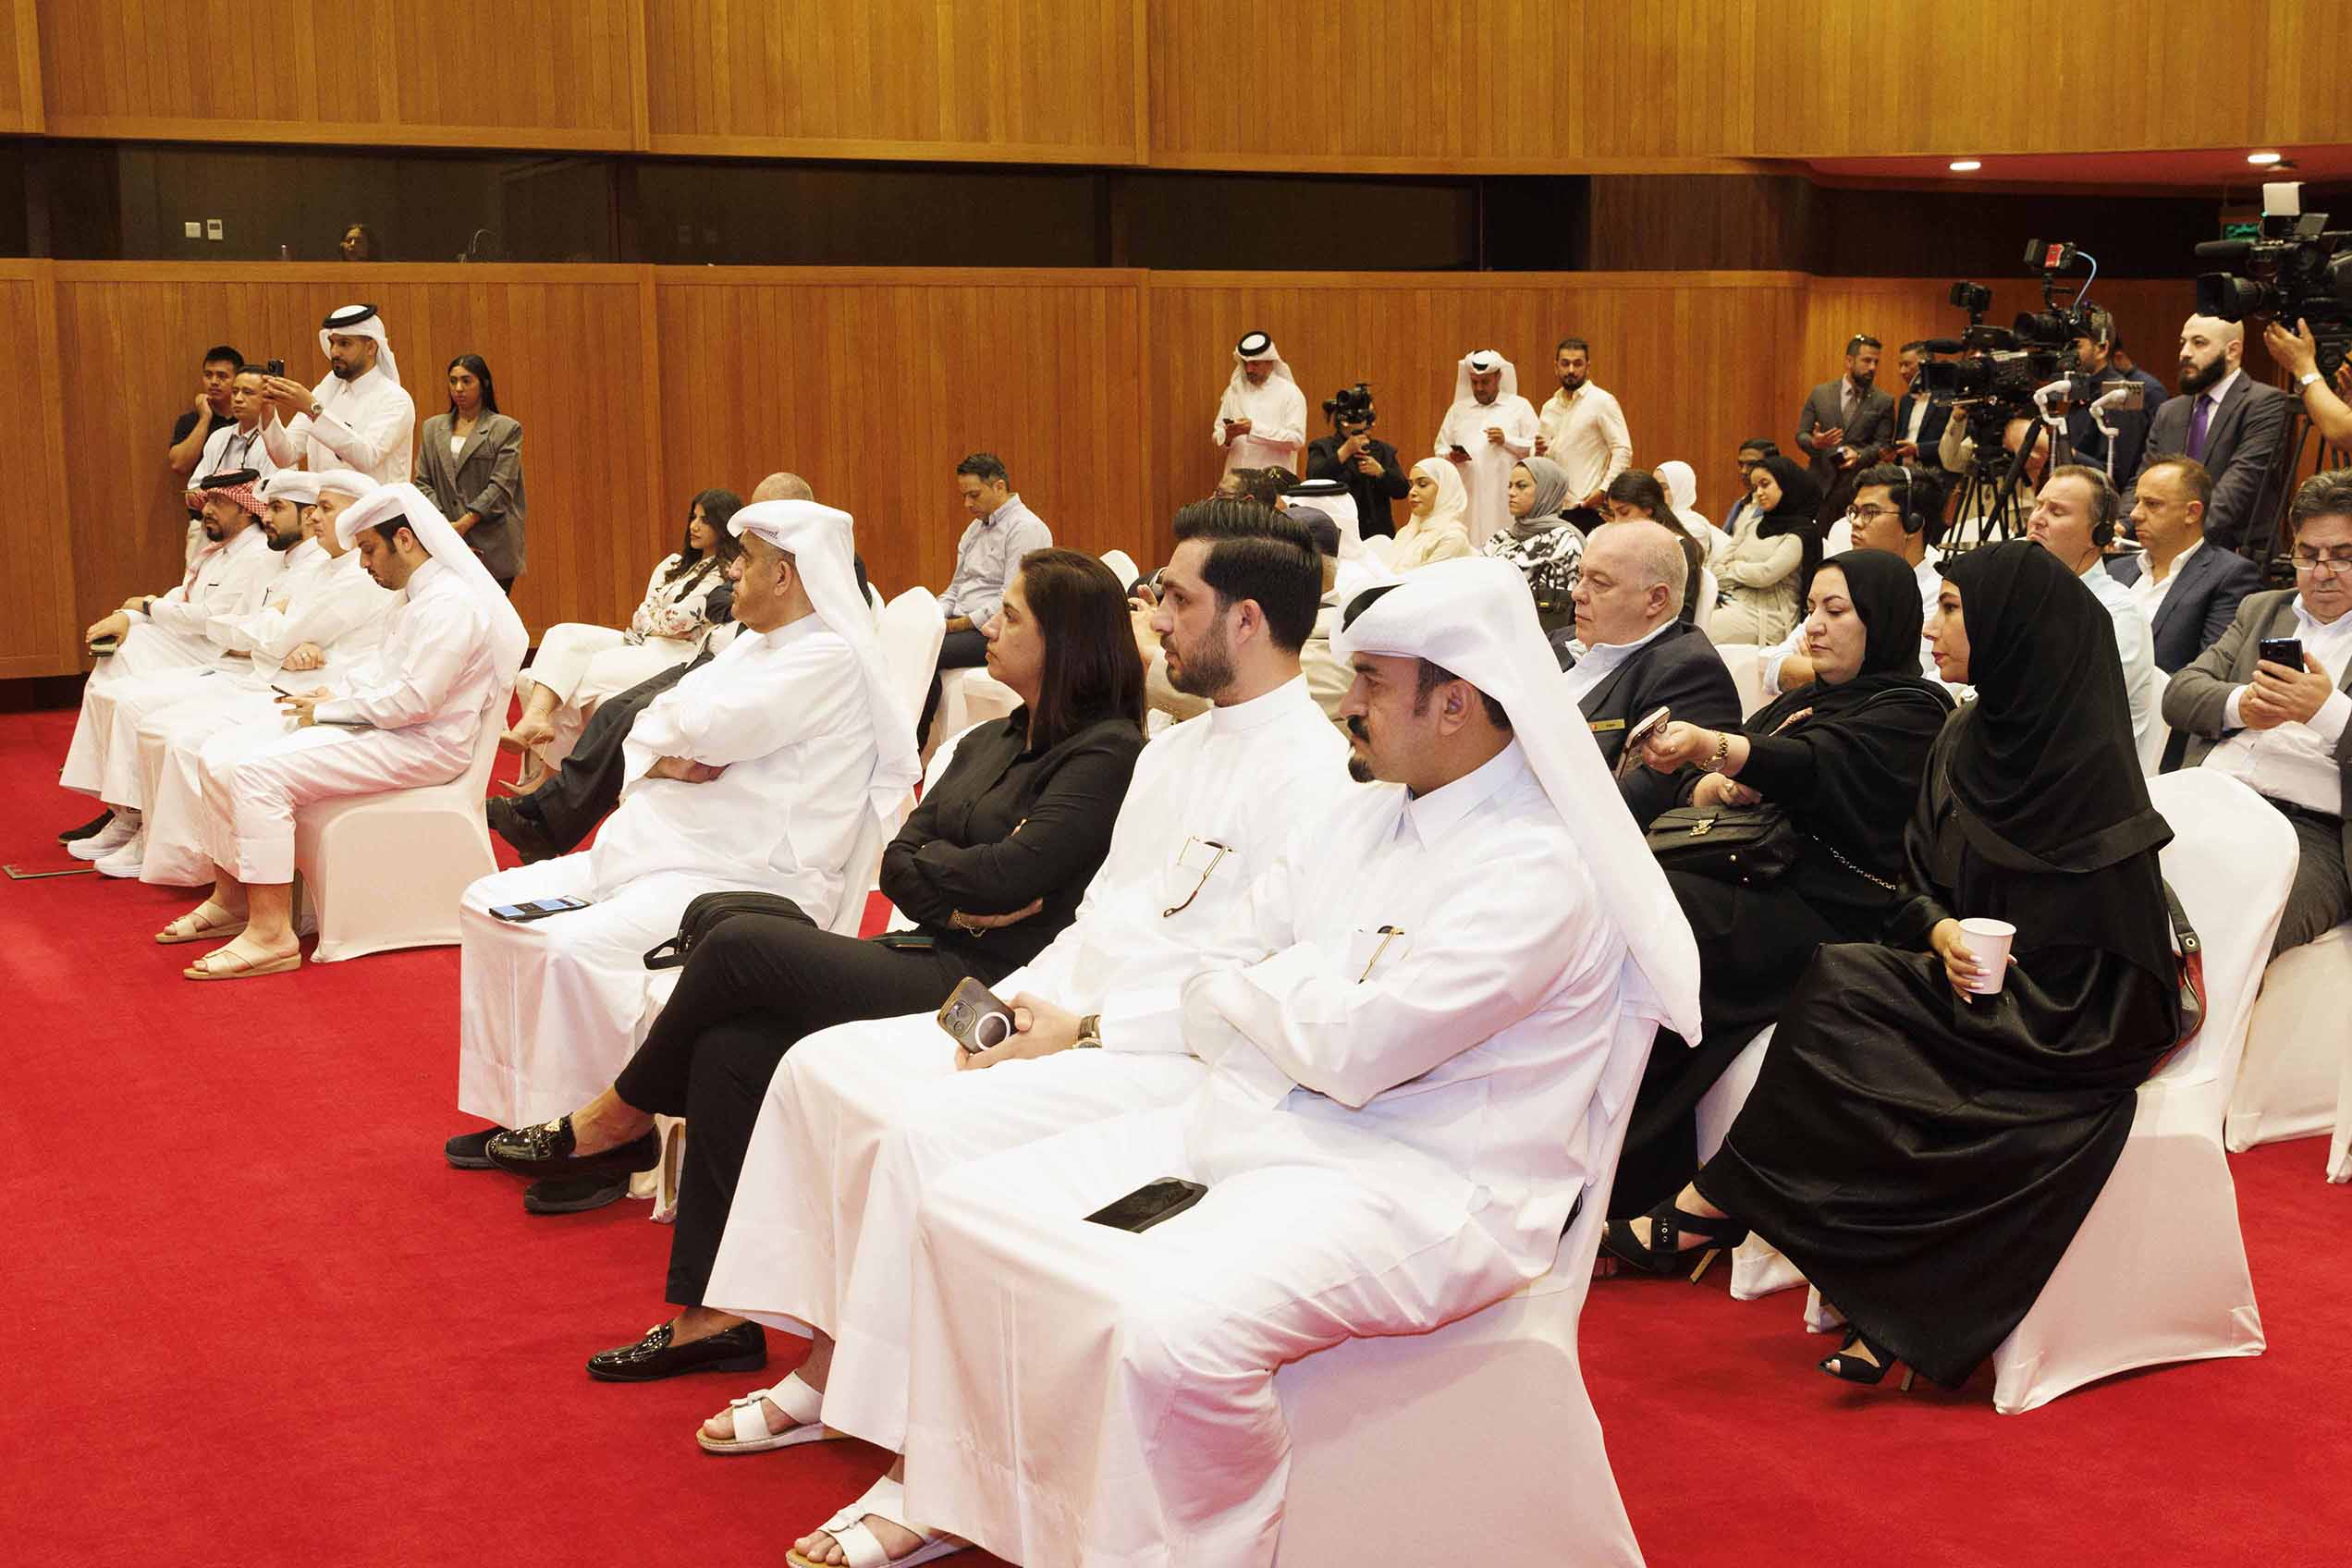 IFP Qatar Unveils Details for the 20th Edition of Project Qatar